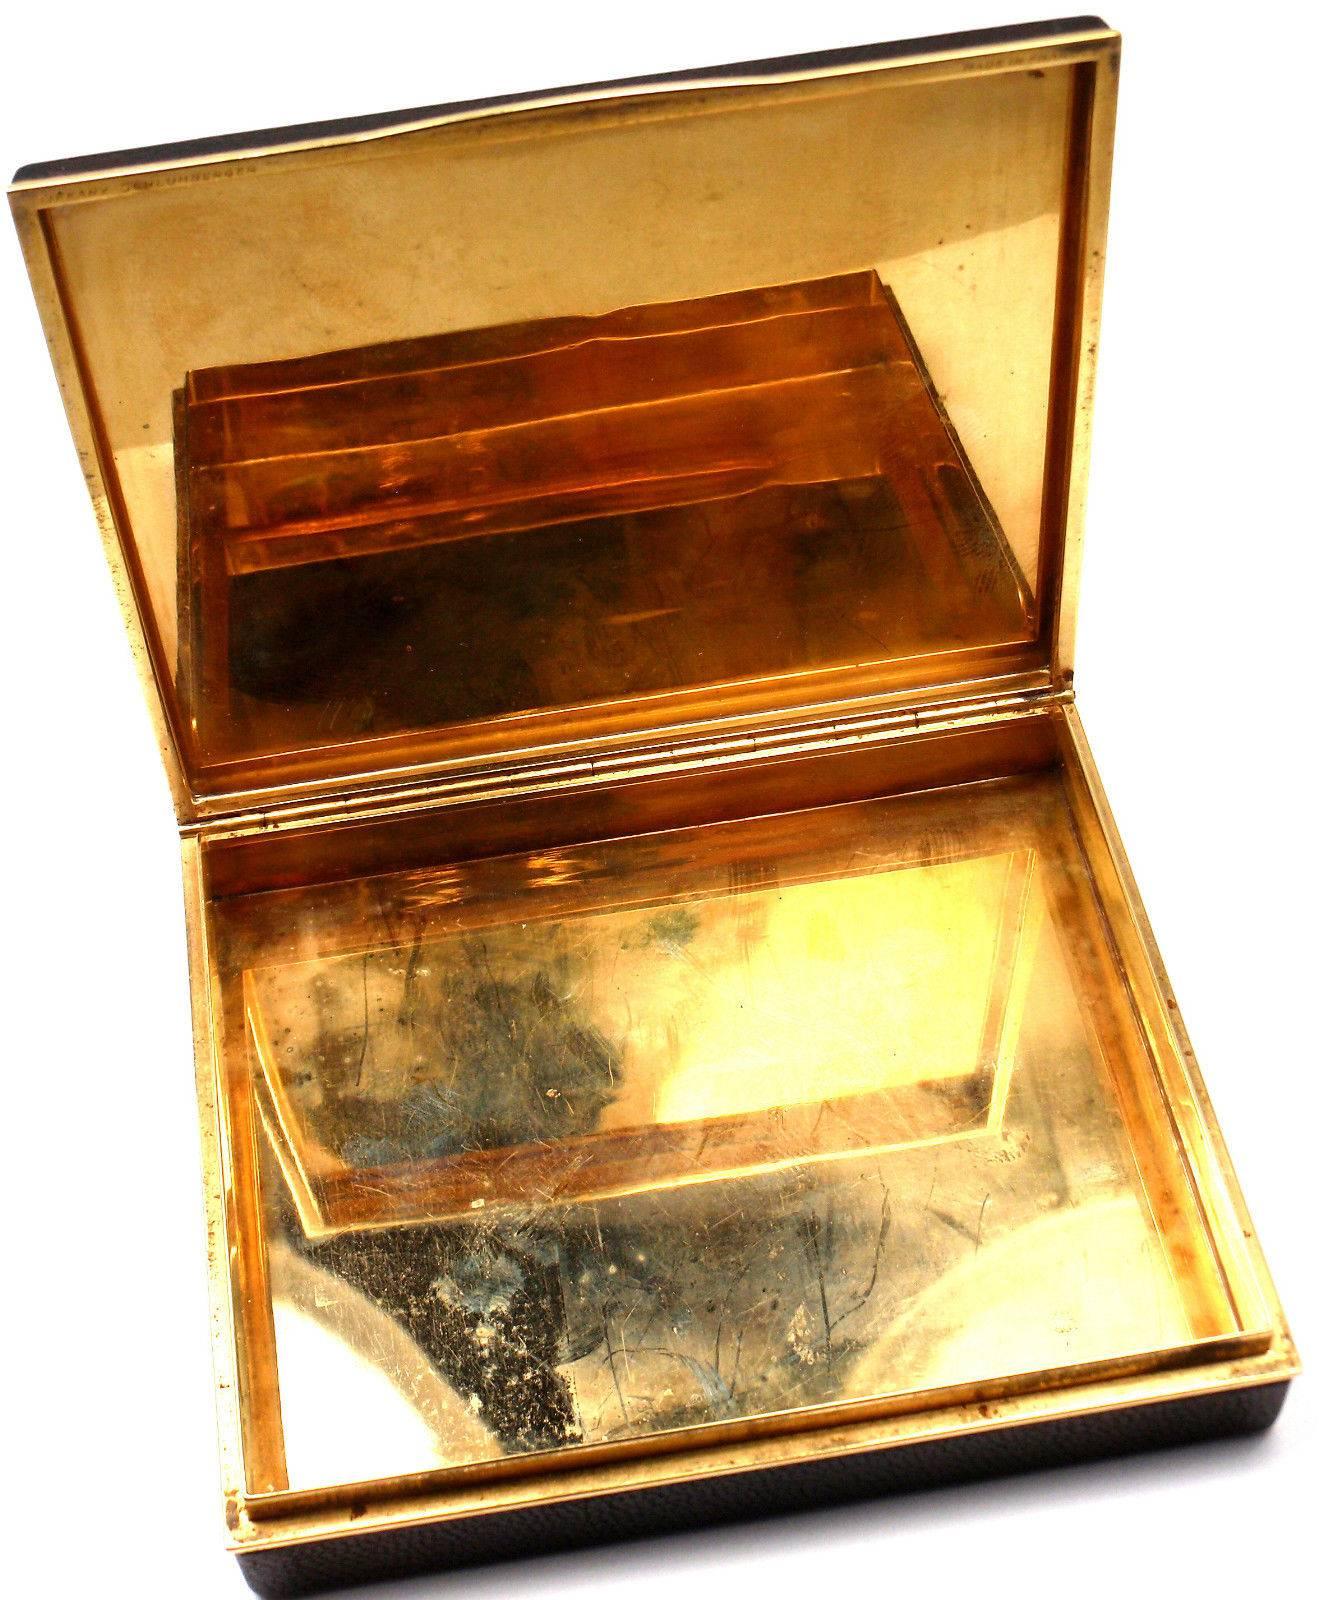 18k Yellow Gold & Leather Box by Jean Schlumberger for Tiffany & Co.

Details:
Measurements: 3 1.2